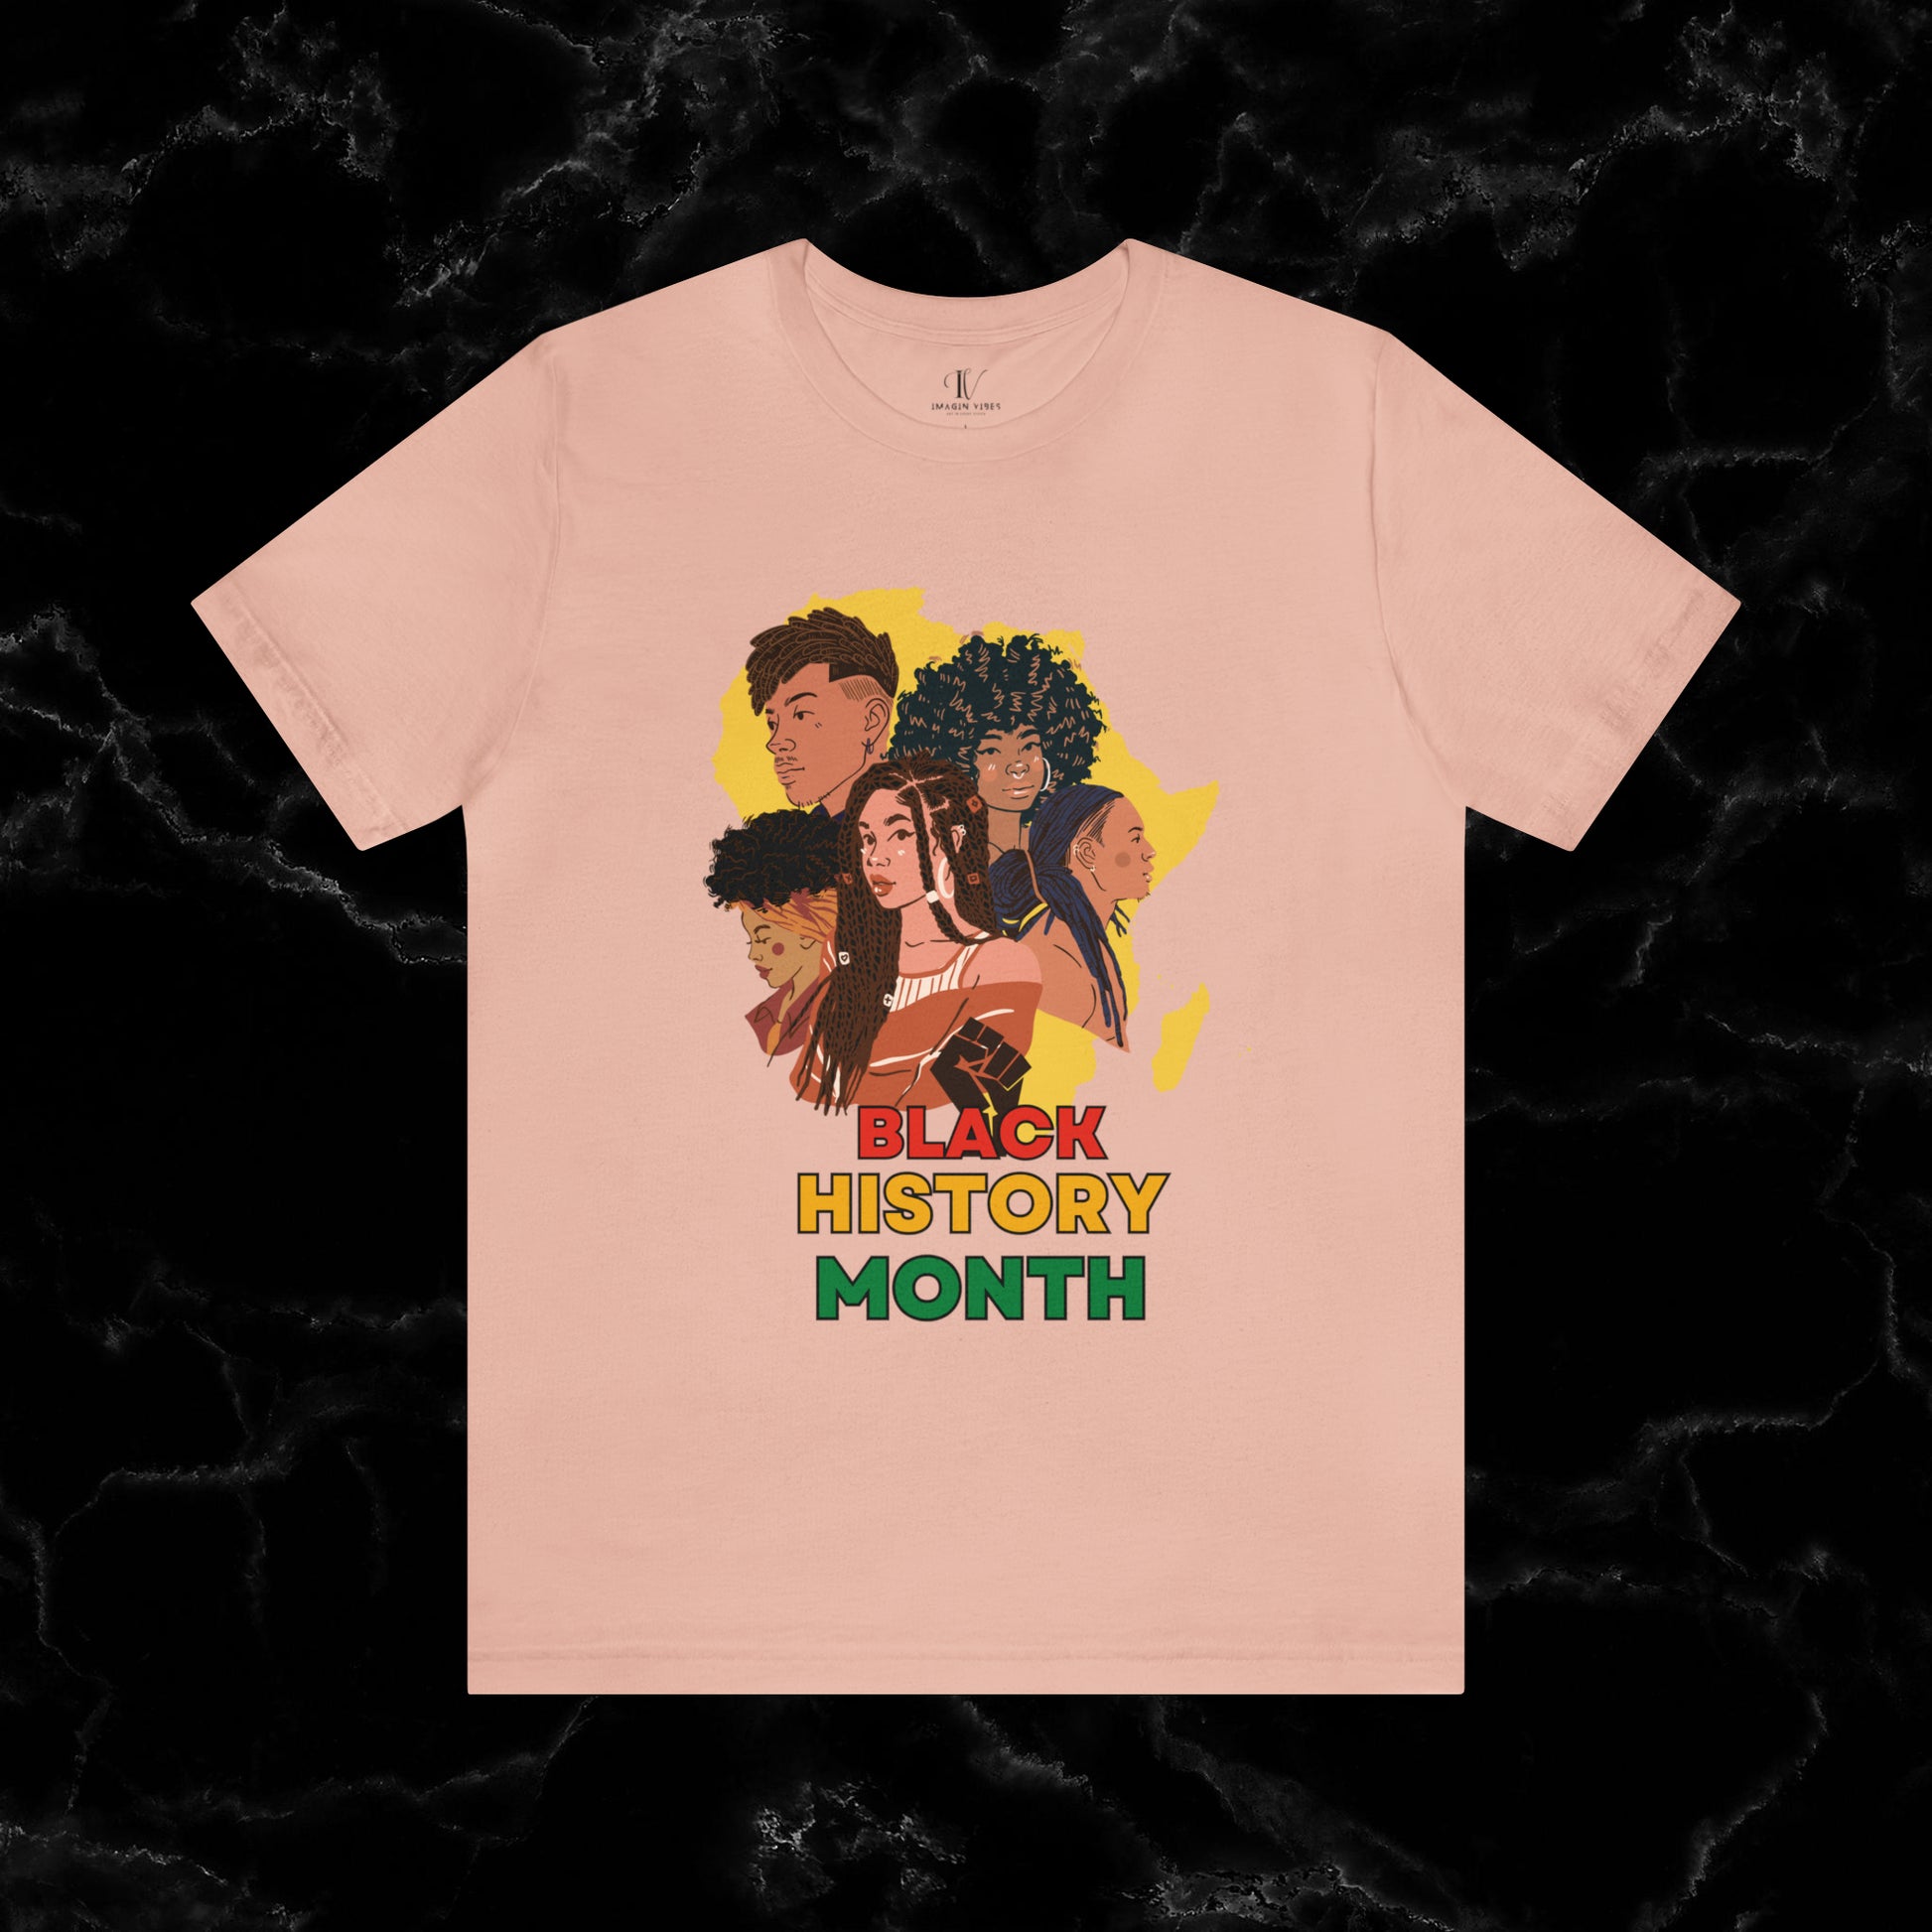 Trendy Black History Month Shirts - Celebrating African American Pride and Heritage T-Shirt Peach XS 